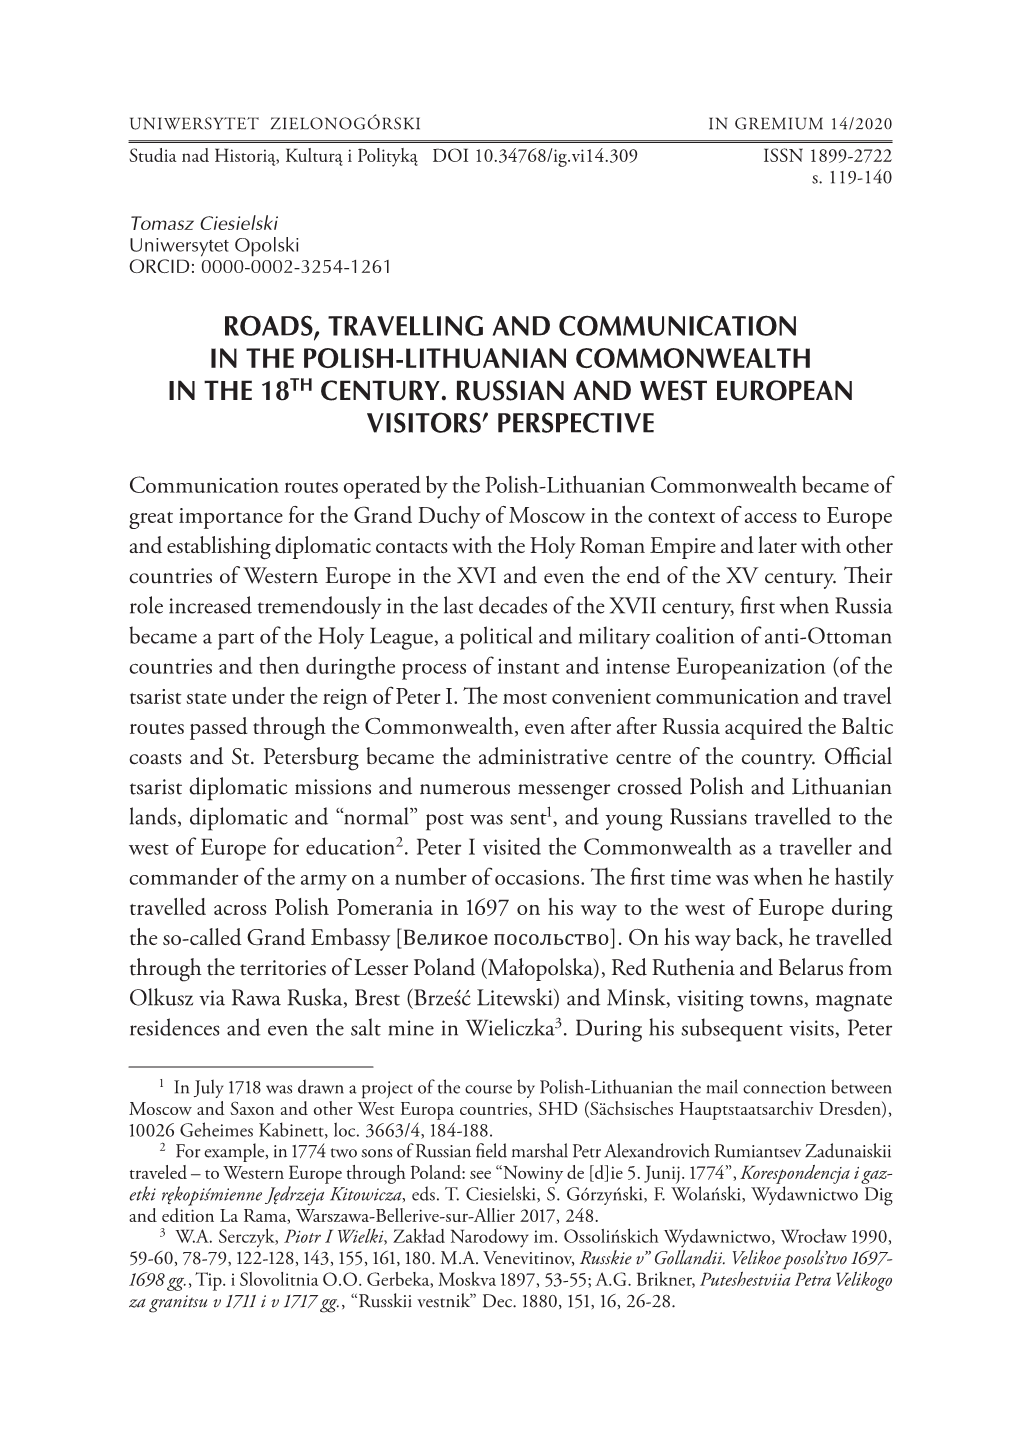 Roads, Travelling and Communication in the Polish-Lithuanian Commonwealth in the 18Th Century. Russian and West European Visitors’ Perspective